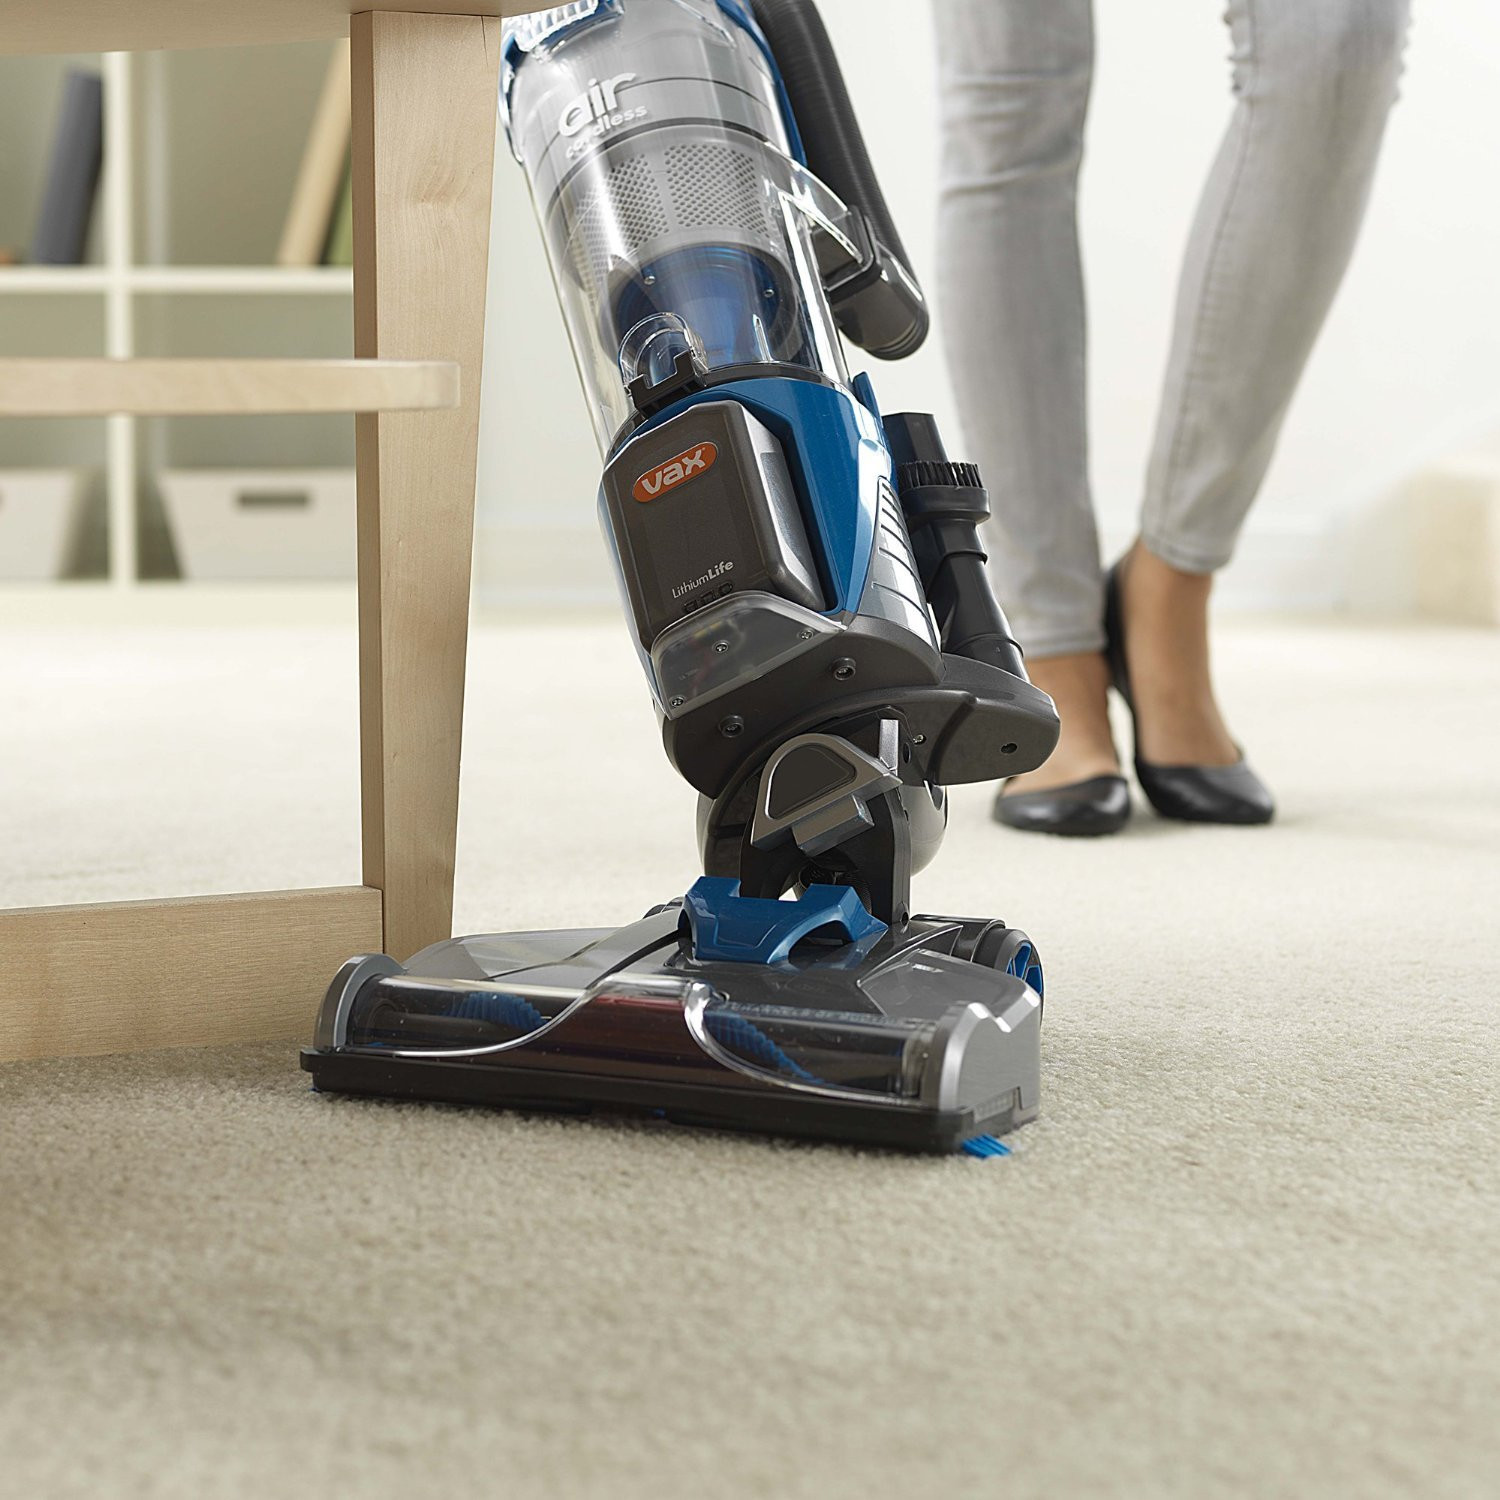 12 Ideal Miele Vacuum Cleaner for Hardwood Floors 2024 free download miele vacuum cleaner for hardwood floors of benefits and disadvantages of using a cordless vacuum cleaners for with regard to however if you want to utilize cordless technology in order to c